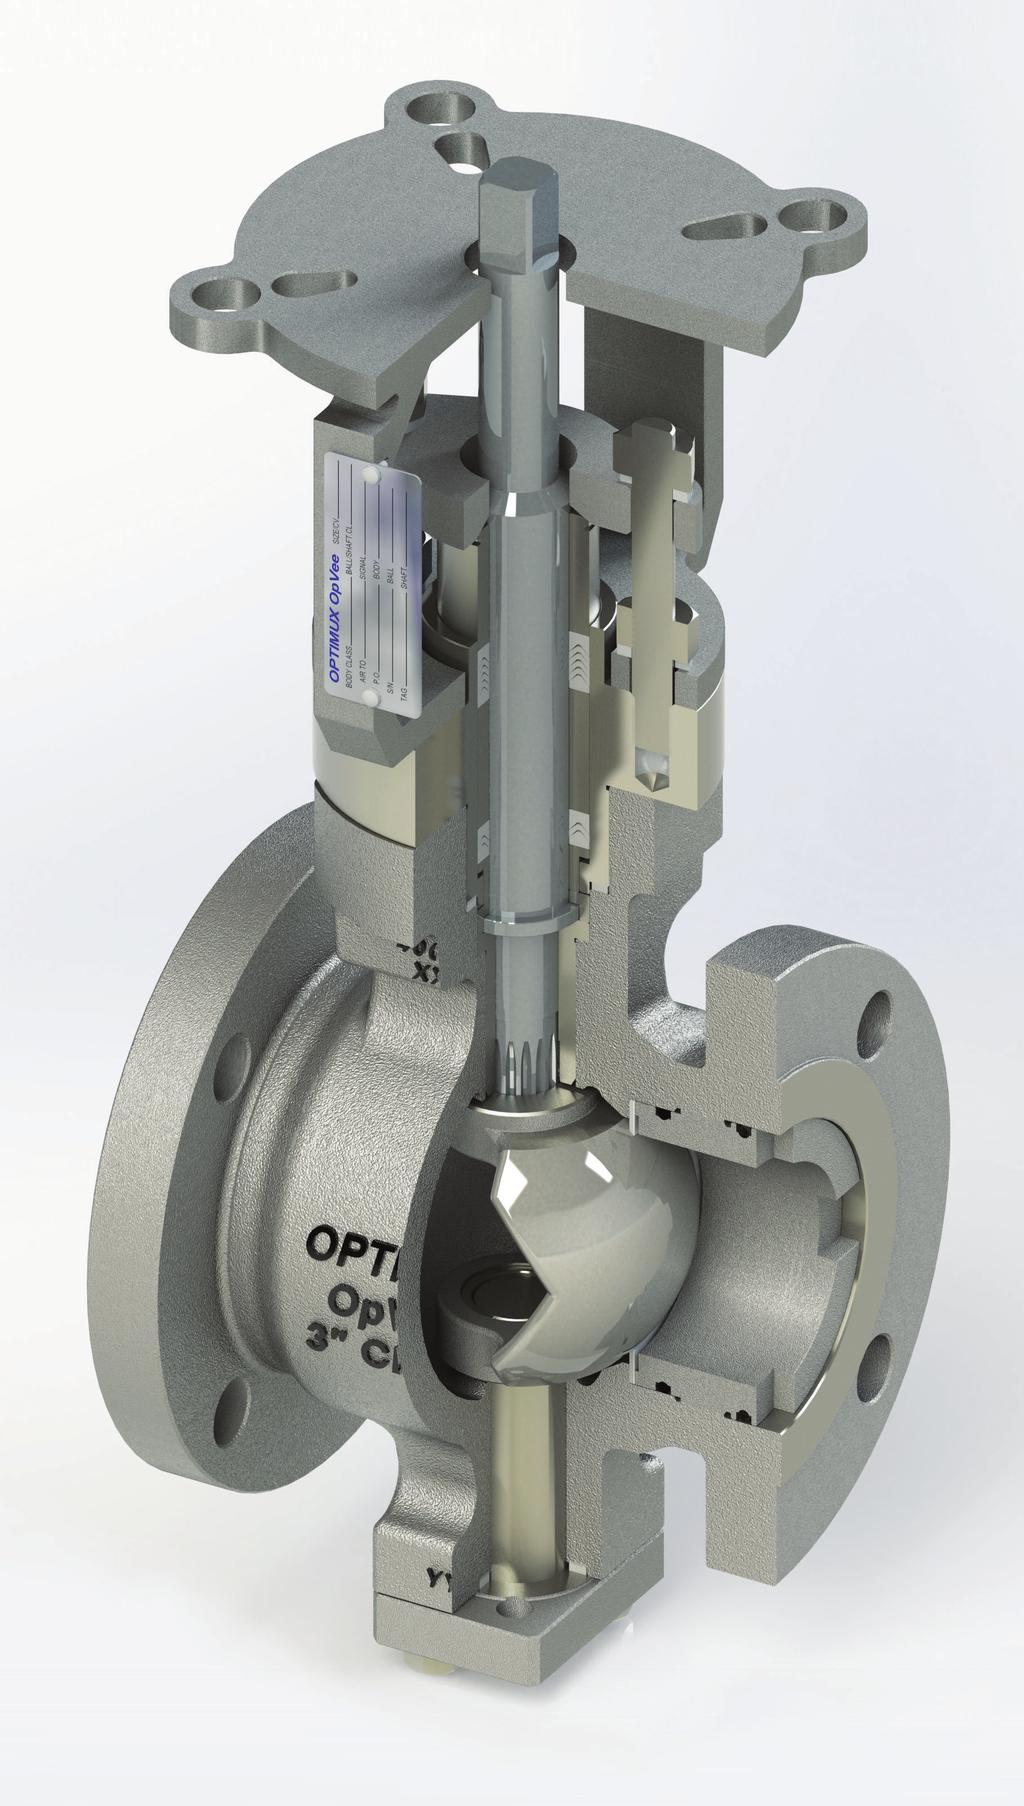 OpVEE Introduction TM Trimteck s OpVEE Control Valve is the highest performance V-Notch Ball Valve on the market today.